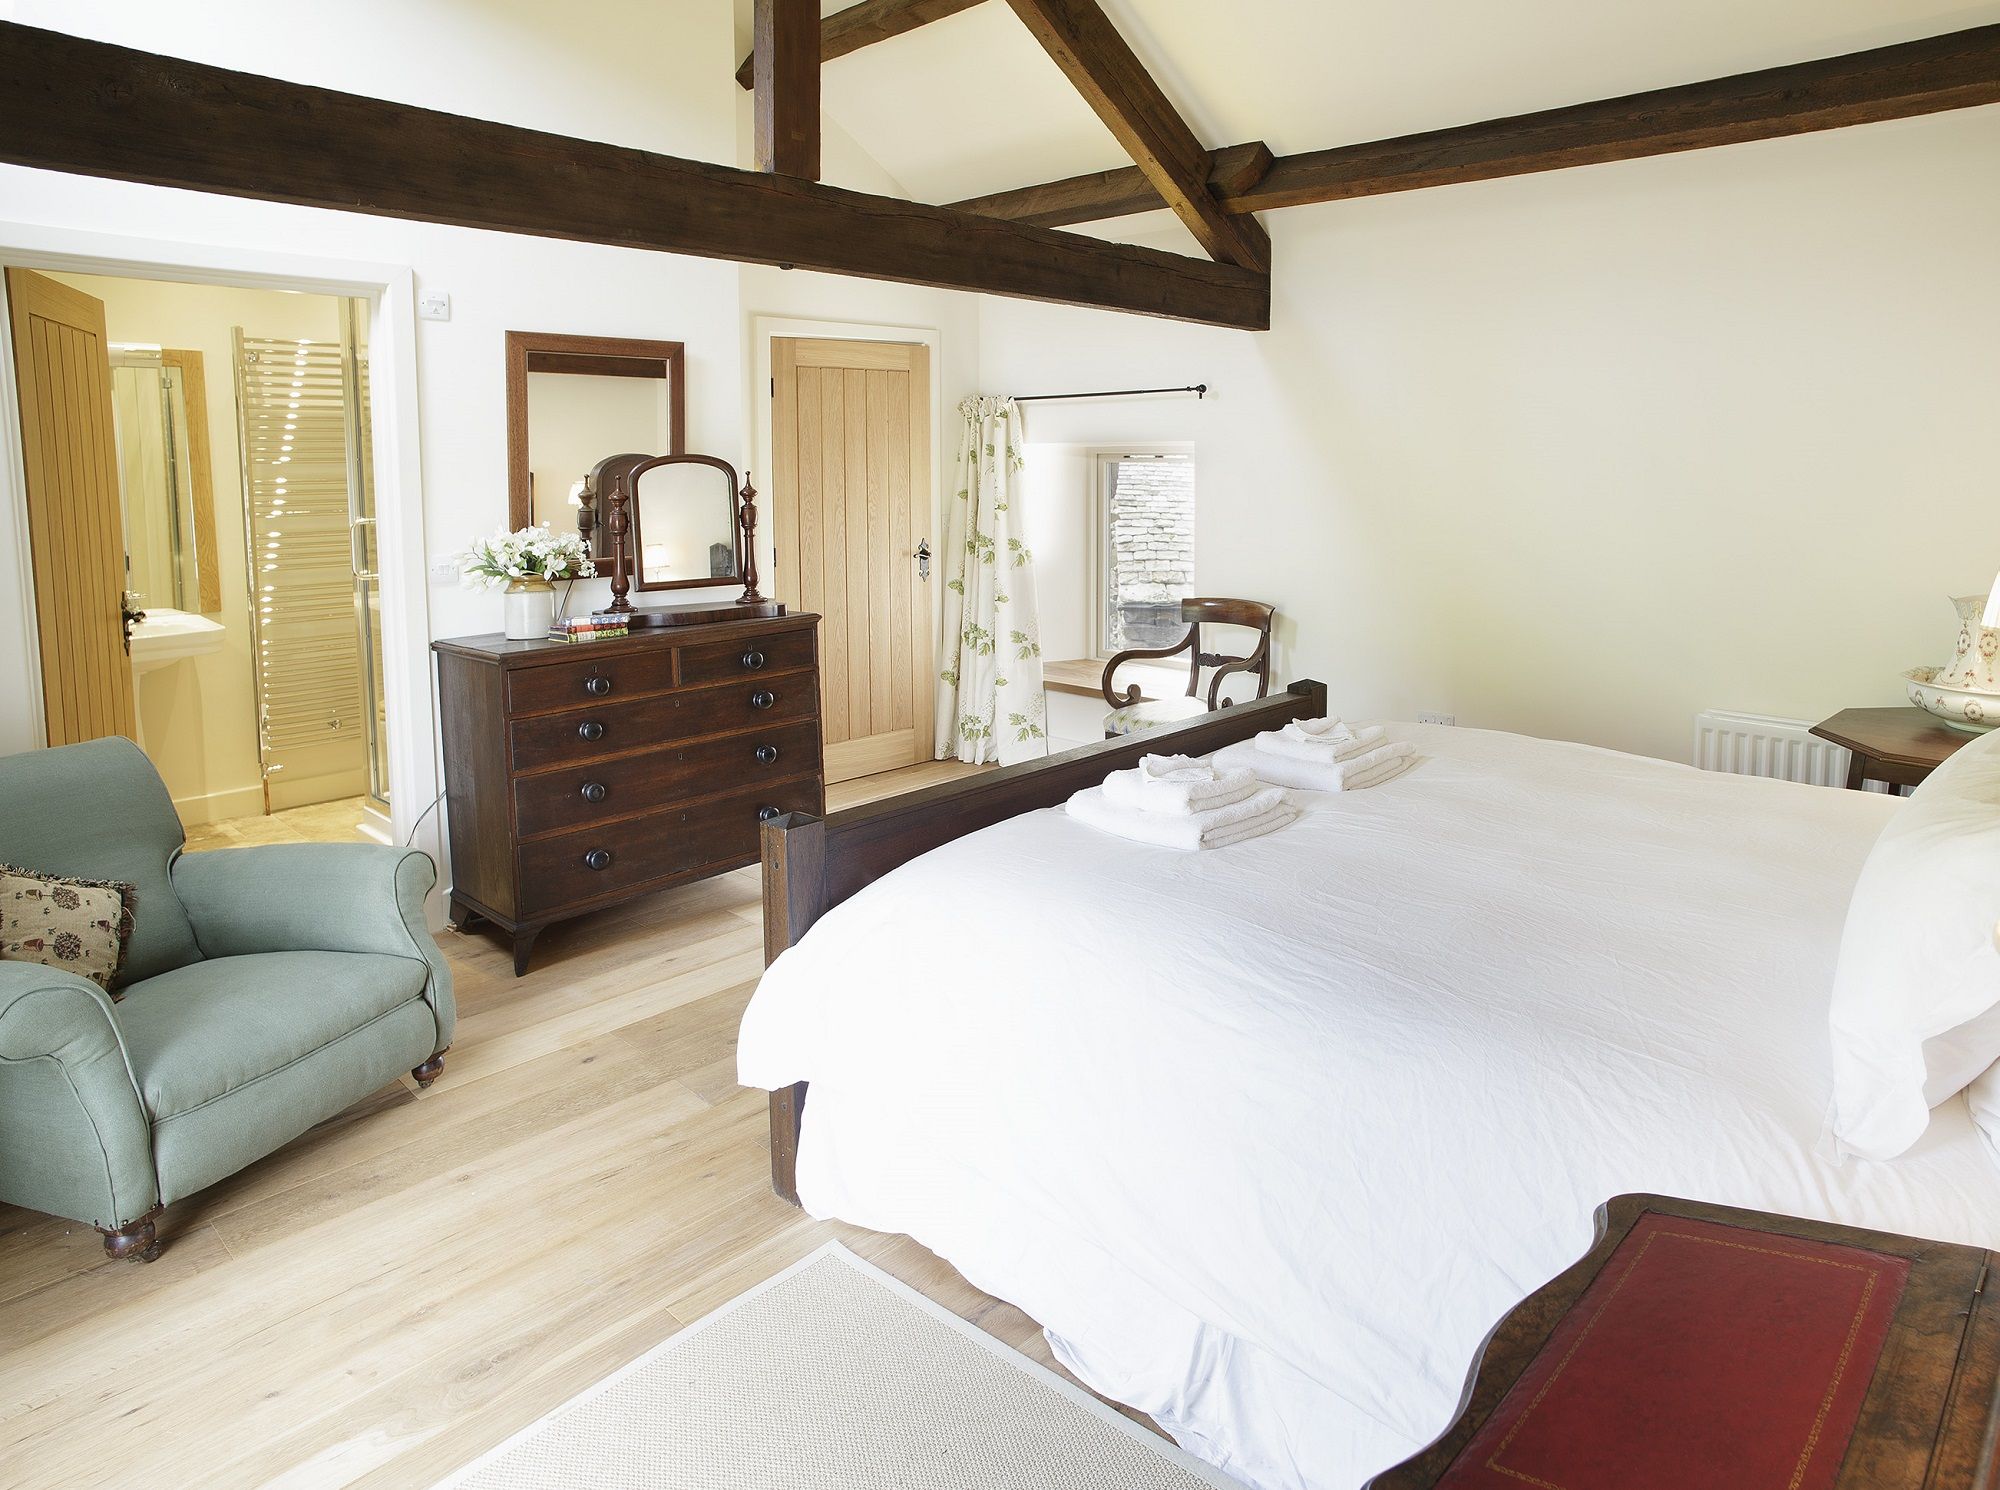 Hause Hall Farm Master Bedroom on first floor ensuite with shower and roll top bath holiday cottage in Lake District National Park at The Rowley Estates